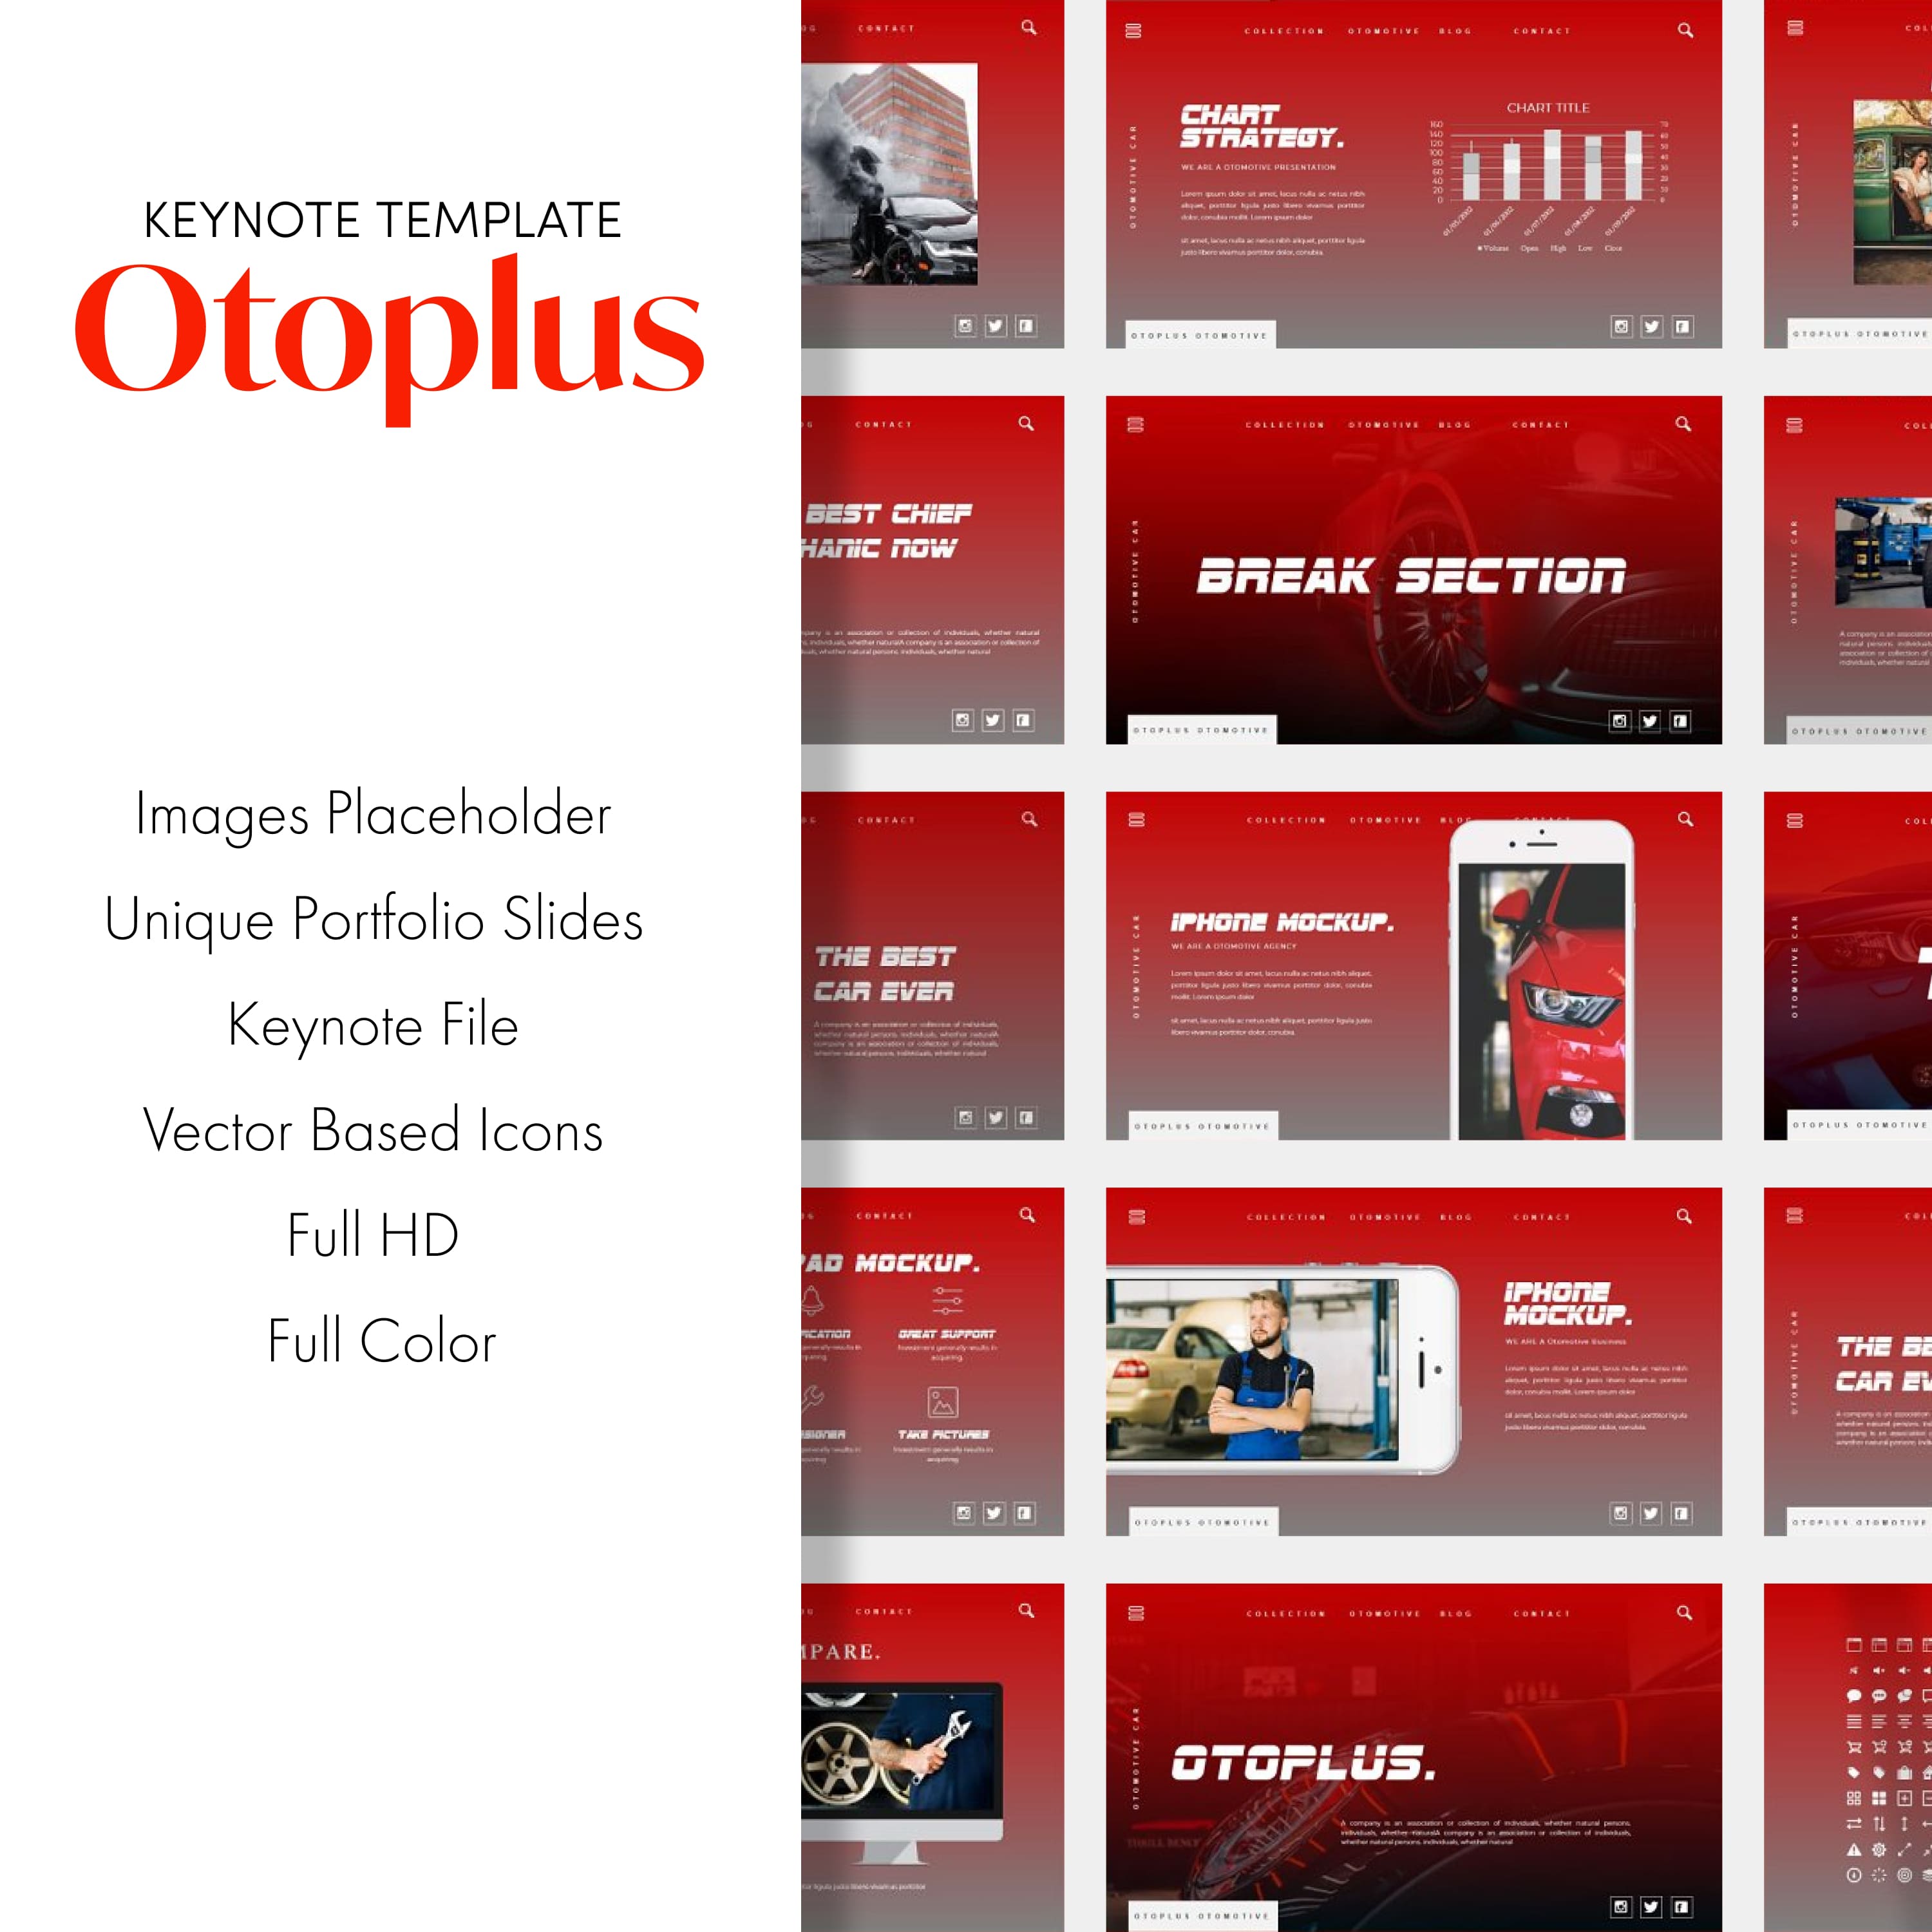 Otoplus keynote template - main image preview.